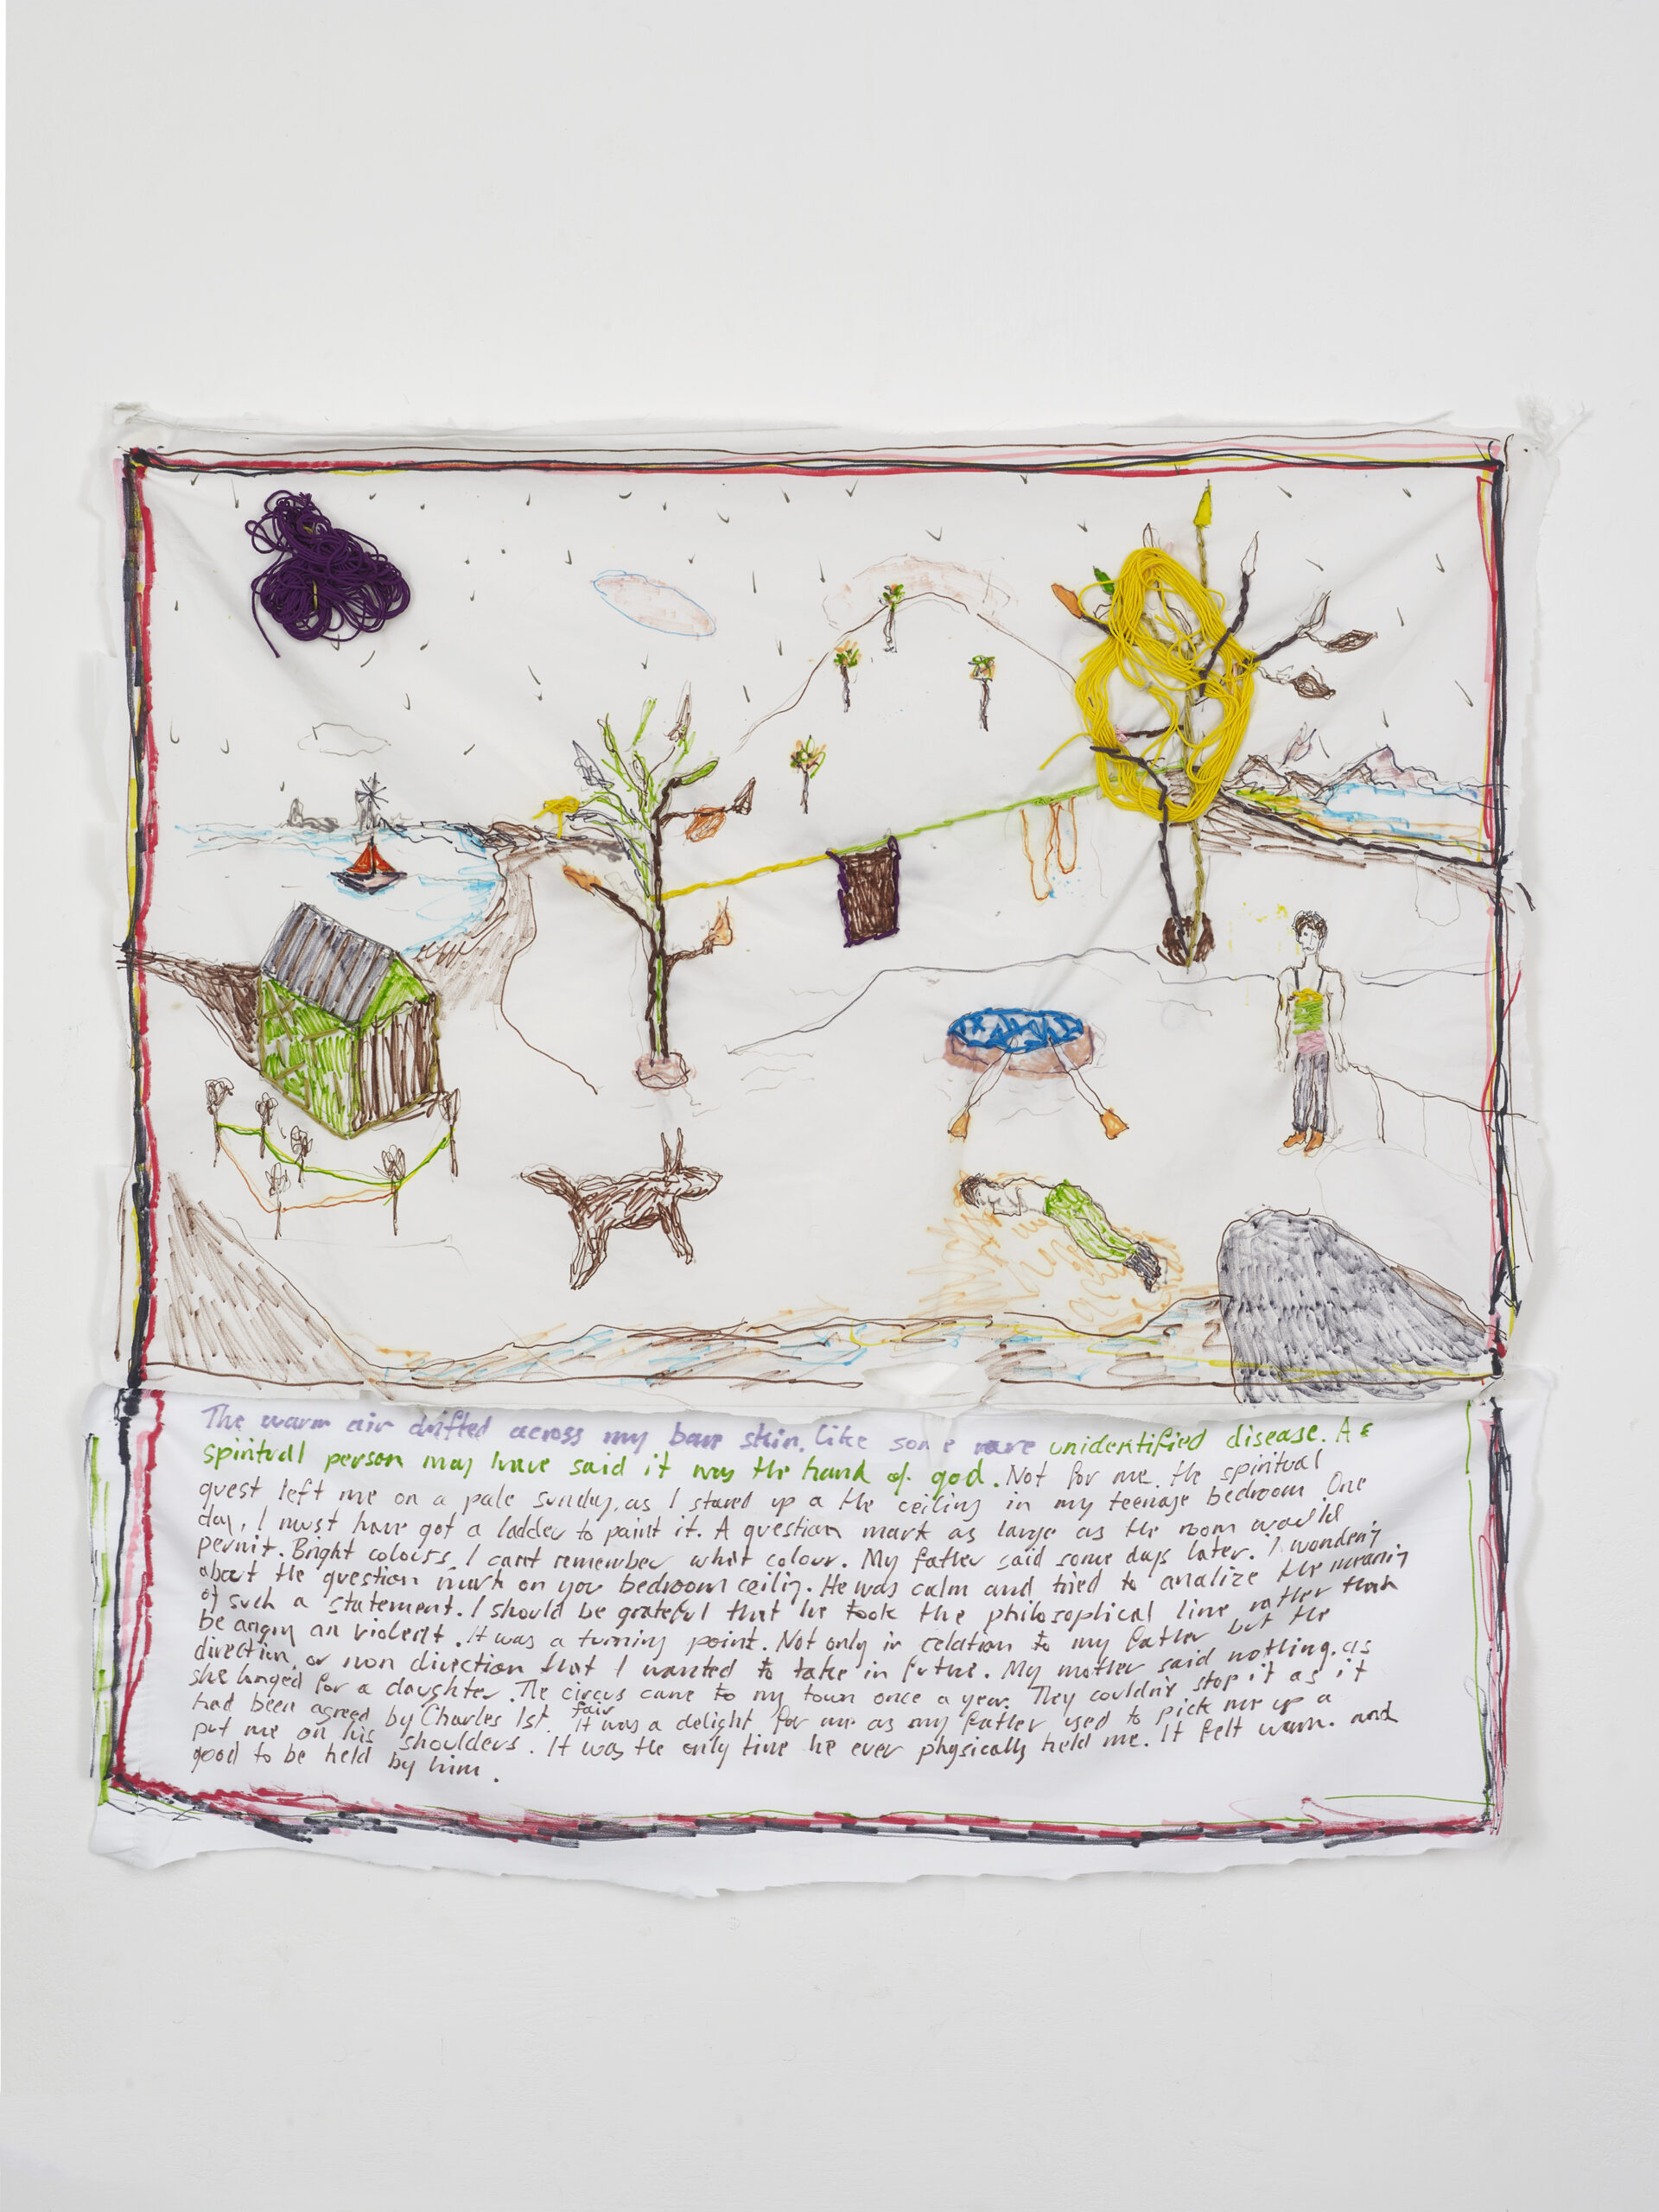 Brian Dawn Chalkley My mother said nothing (2020) Pencil, felt tip and thread on cotton pillow case, 75 cm x 65 cm.